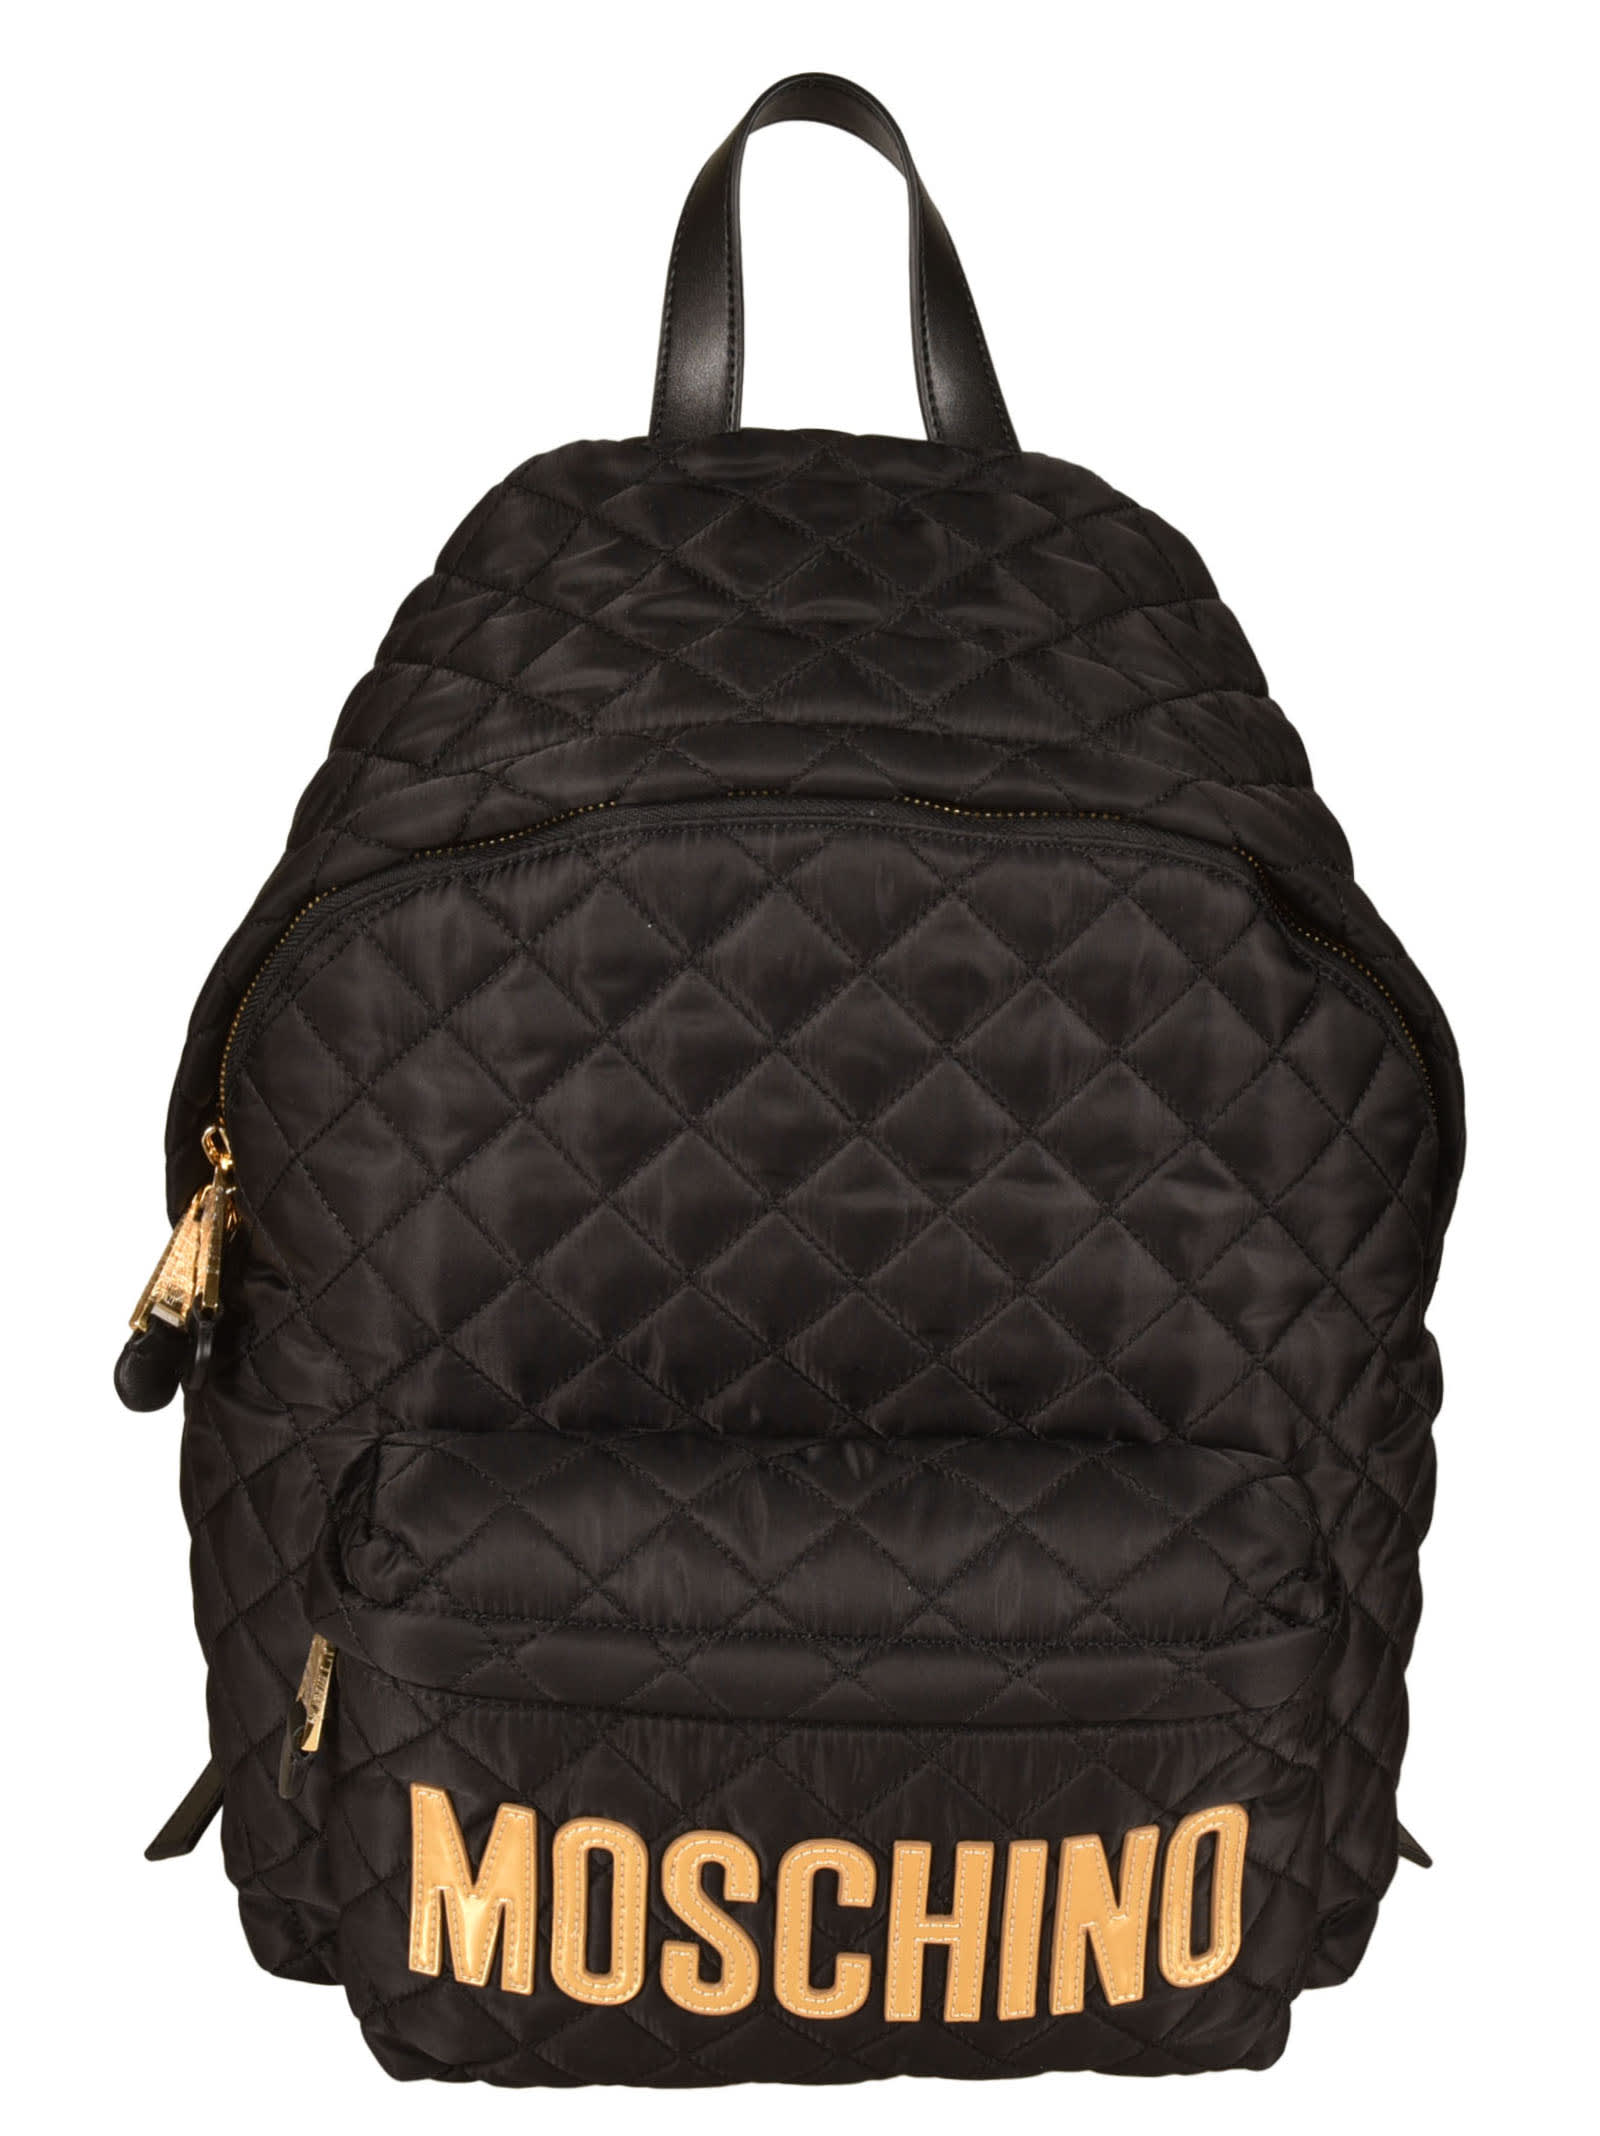 MOSCHINO LOGO QUILTED BACKPACK